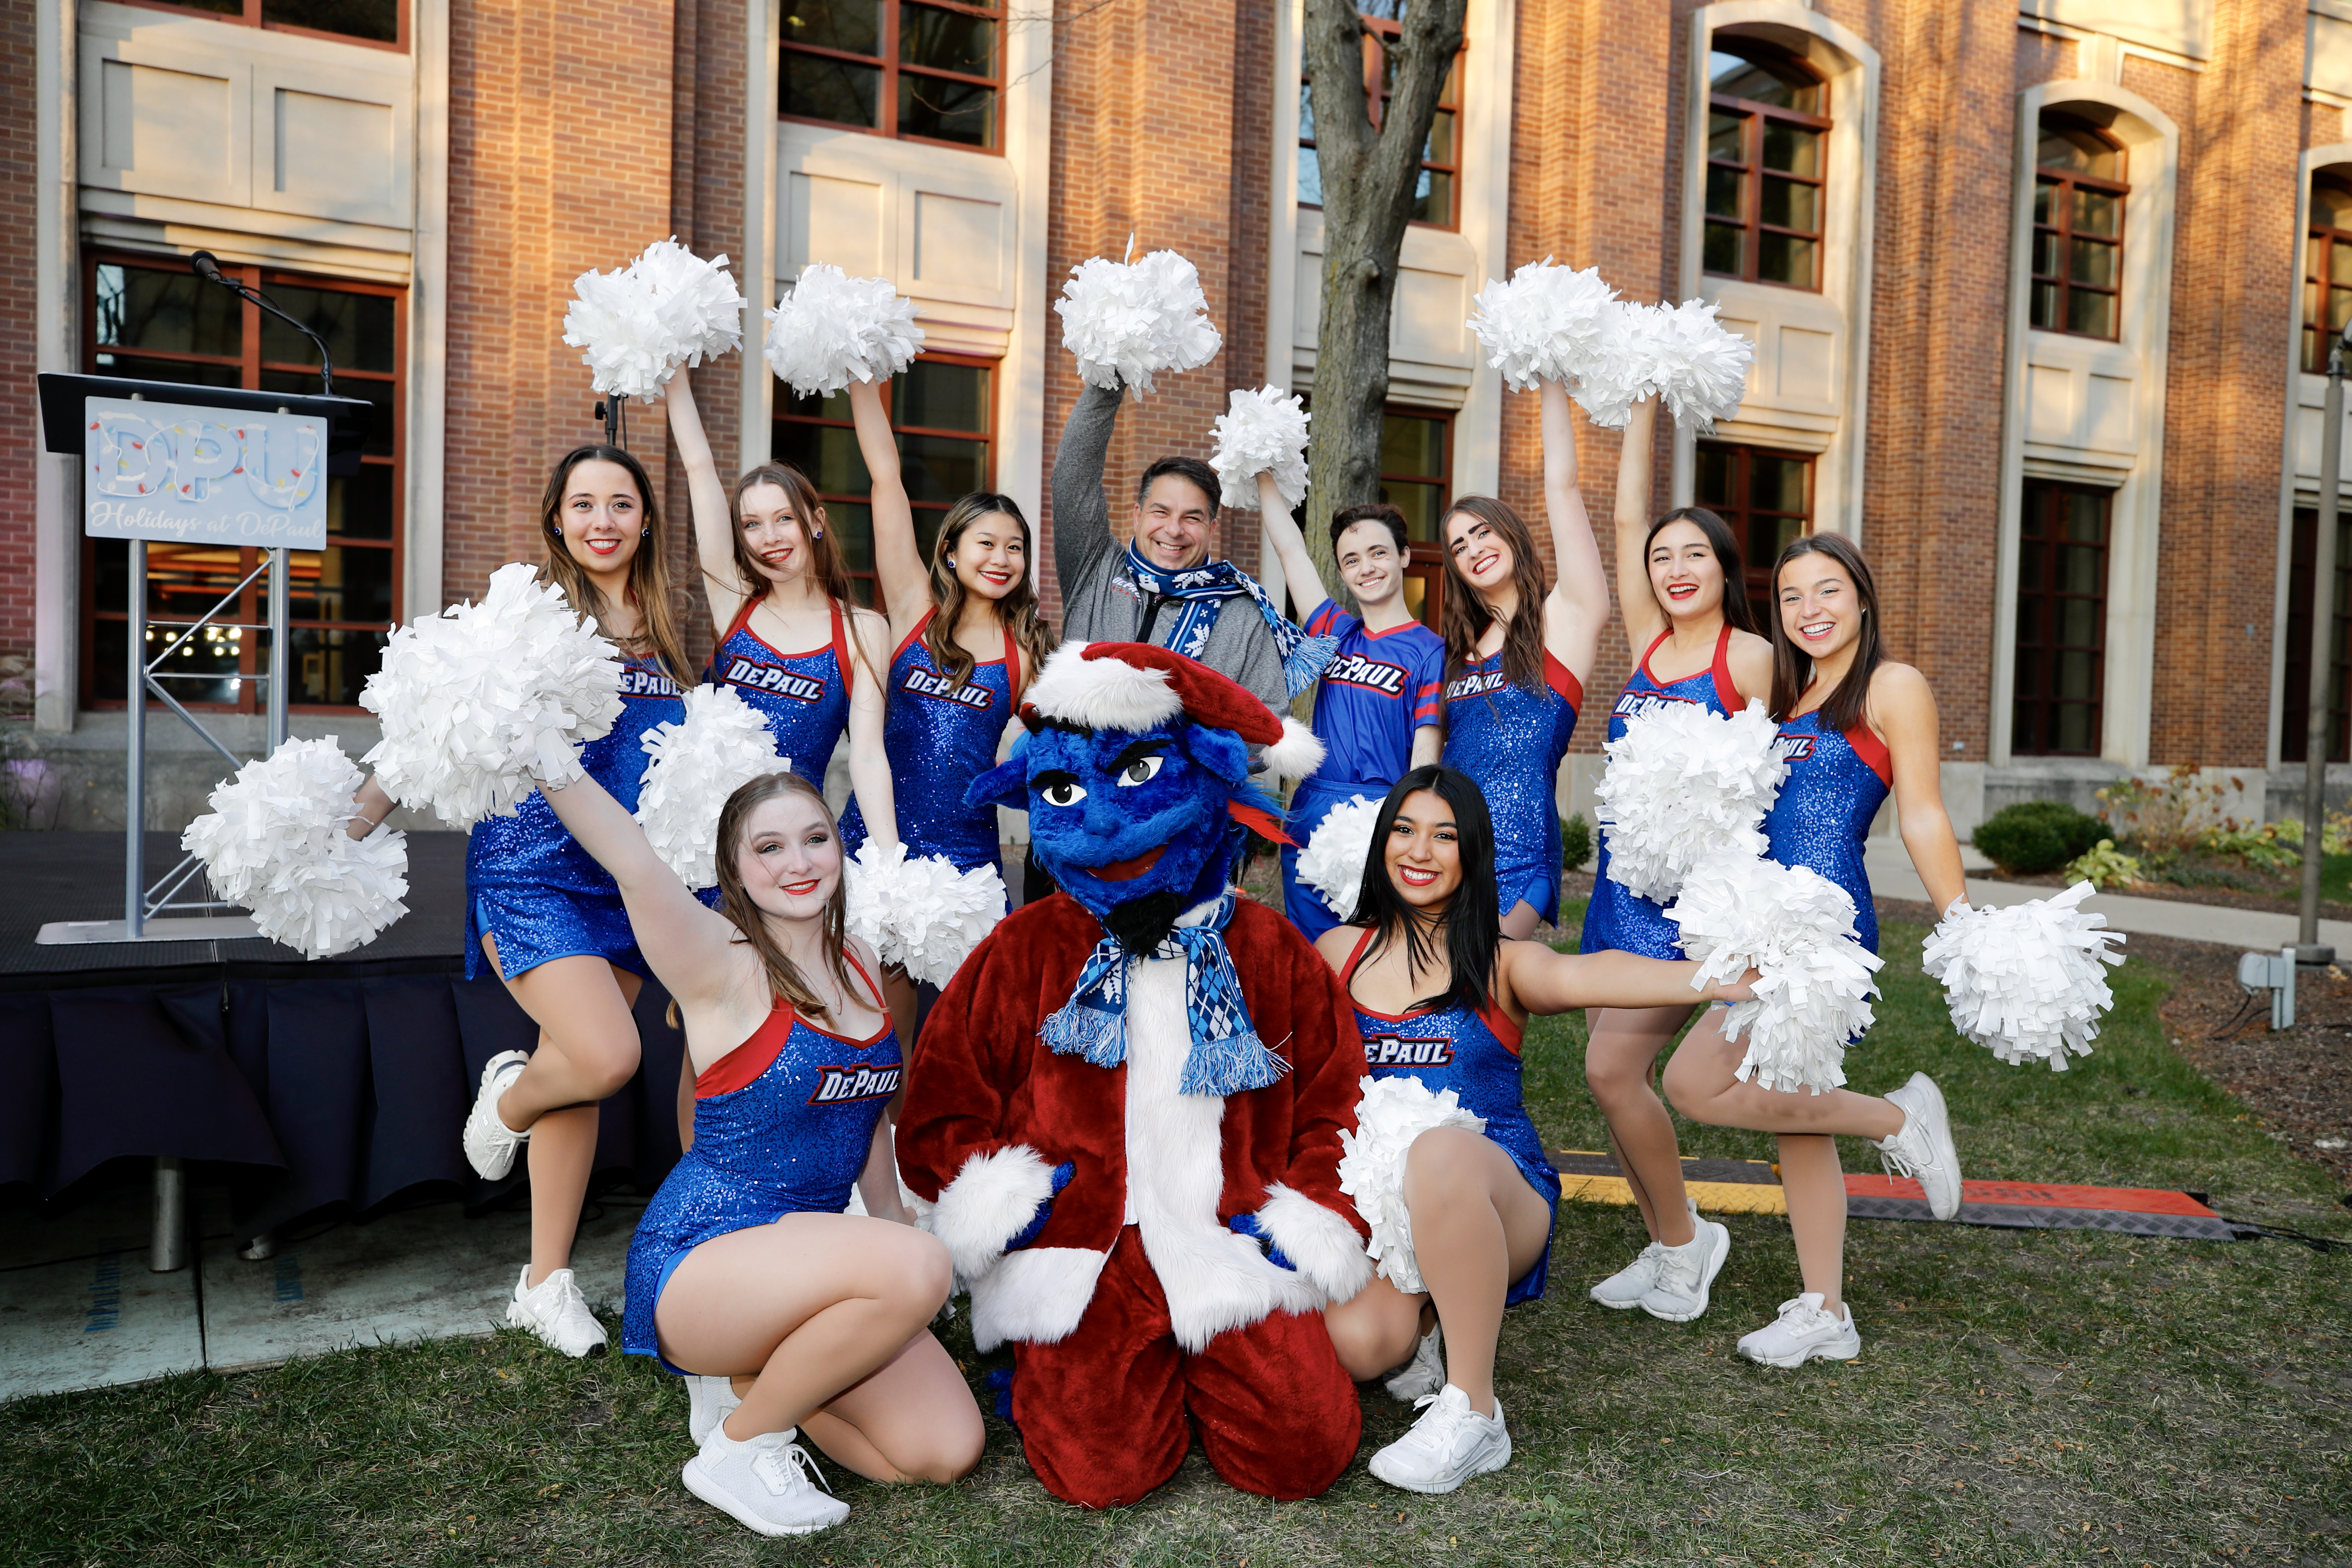 DePaul Dance and Cheer squad pose with DIBS.